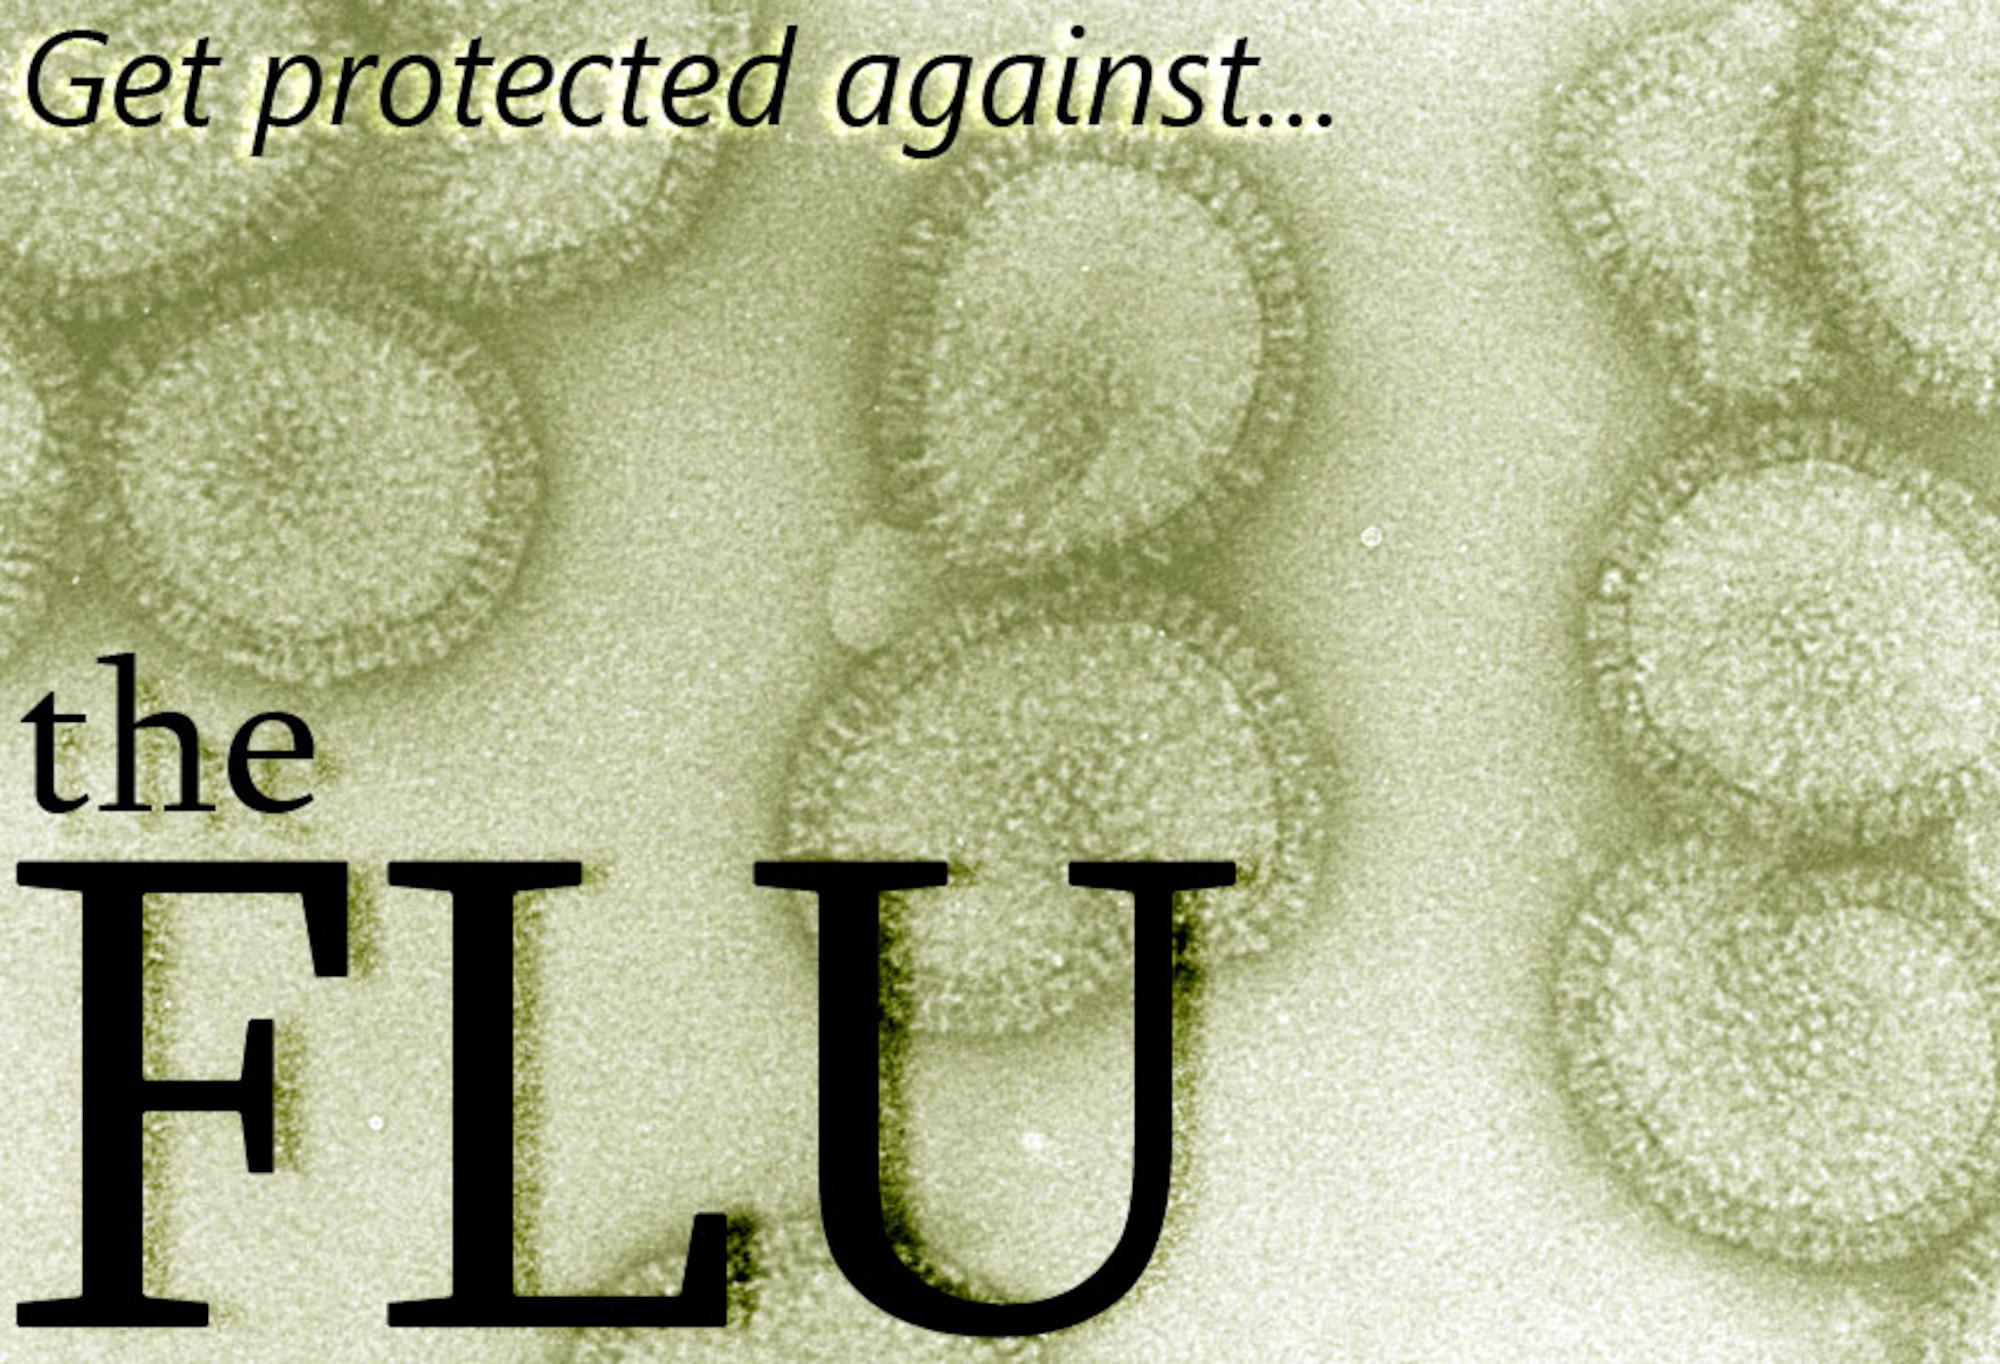 According to the Centers for Disease Control, flu-related illnesses in the United States result in approximately 95 million infections, 25 million doctor visits, 200,000 hospitalizations and on average 36,000 deaths annually. The best method of protection for you against the flu is to receive your annual influenza vaccine. This vaccine is updated every year to best match the predicted circulating virus strains. (U.S. Air Force graphic by Senior Airman Steele C. G. Britton)